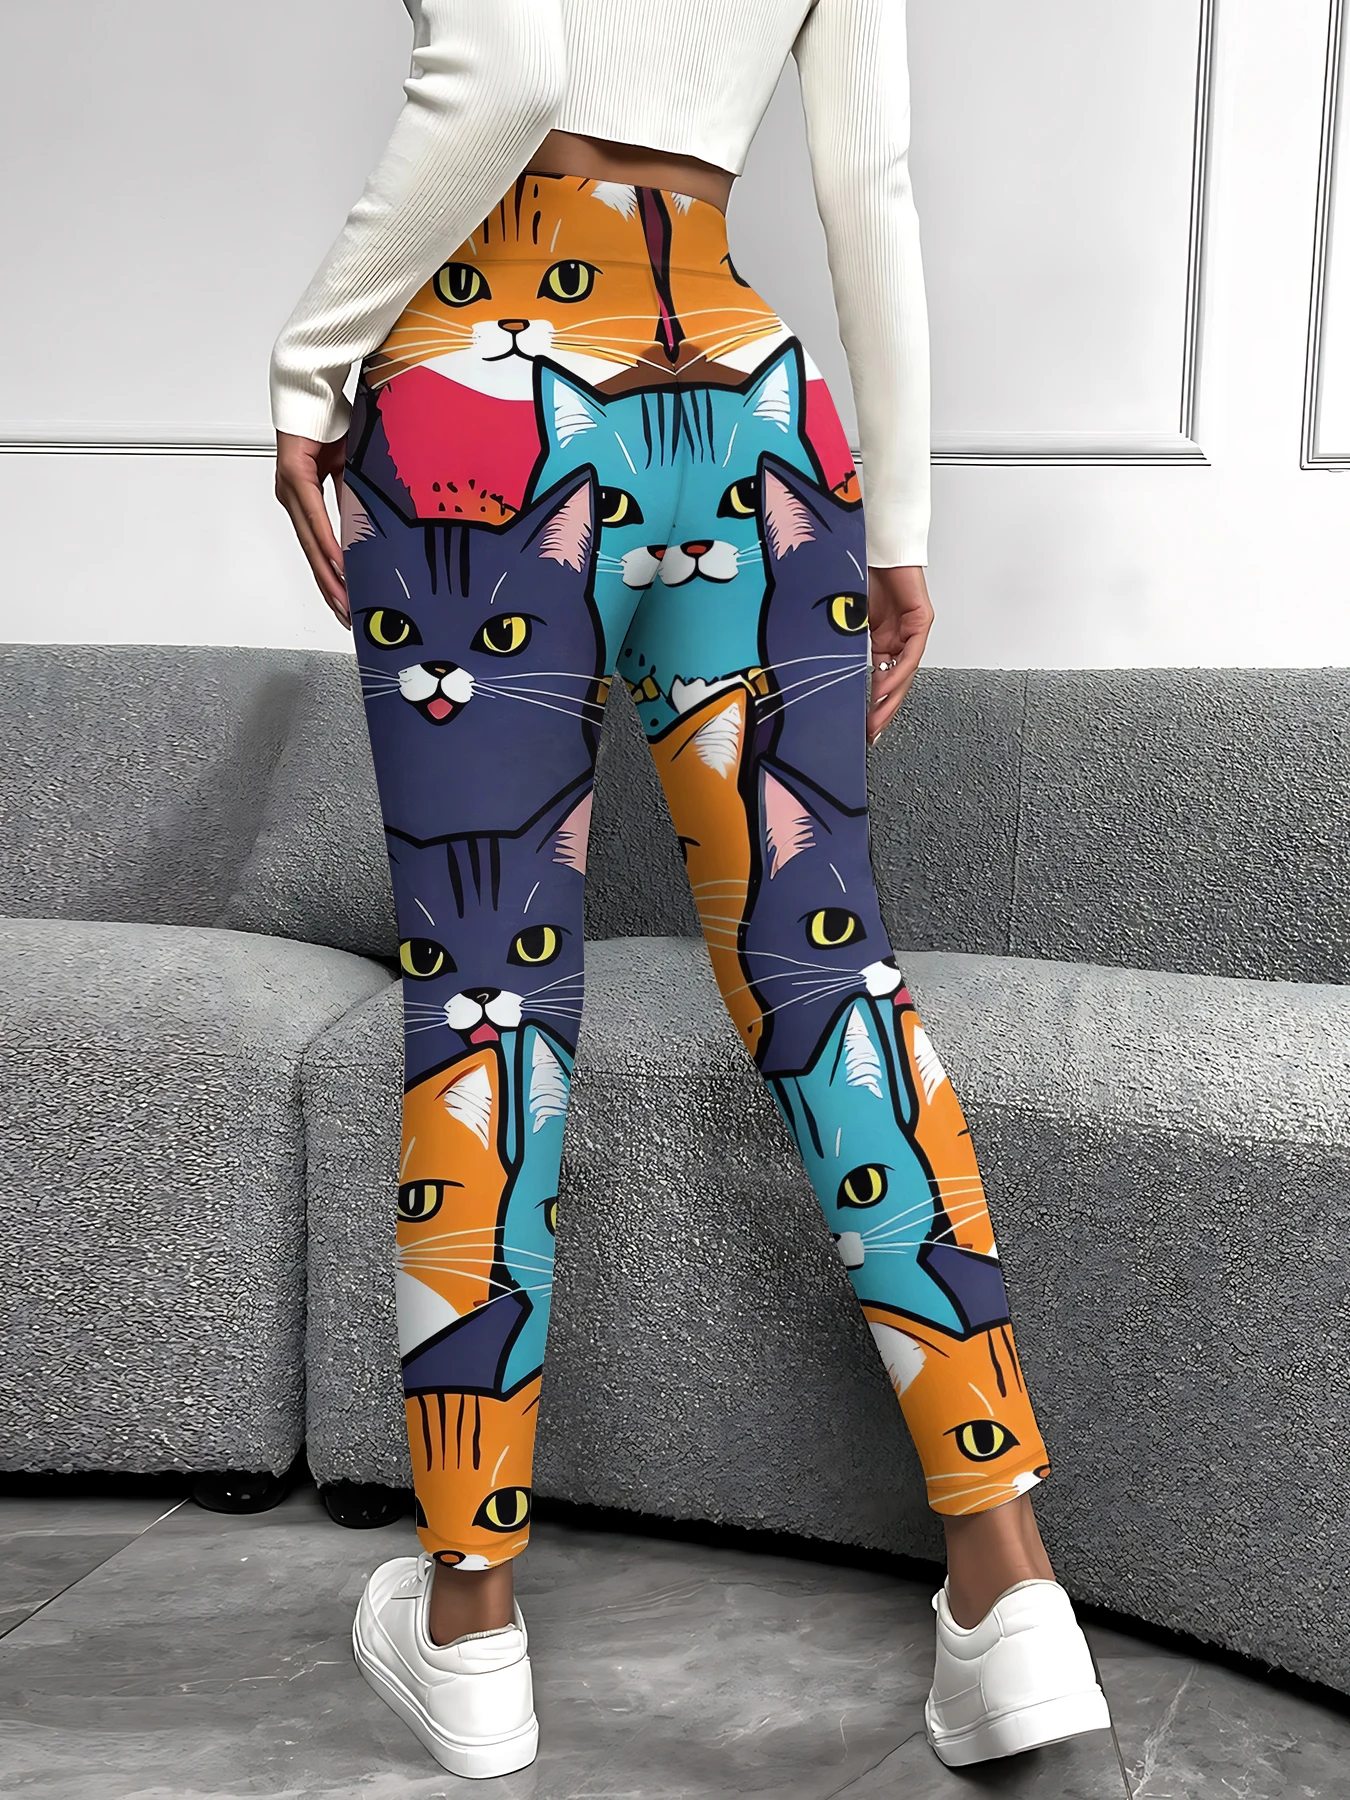 

MSIEESO Fashion Women Leggings Animals Cats 3D Printed Yoga Pants Female Casual Jogging Fitness Sports Clothing Dropshipping